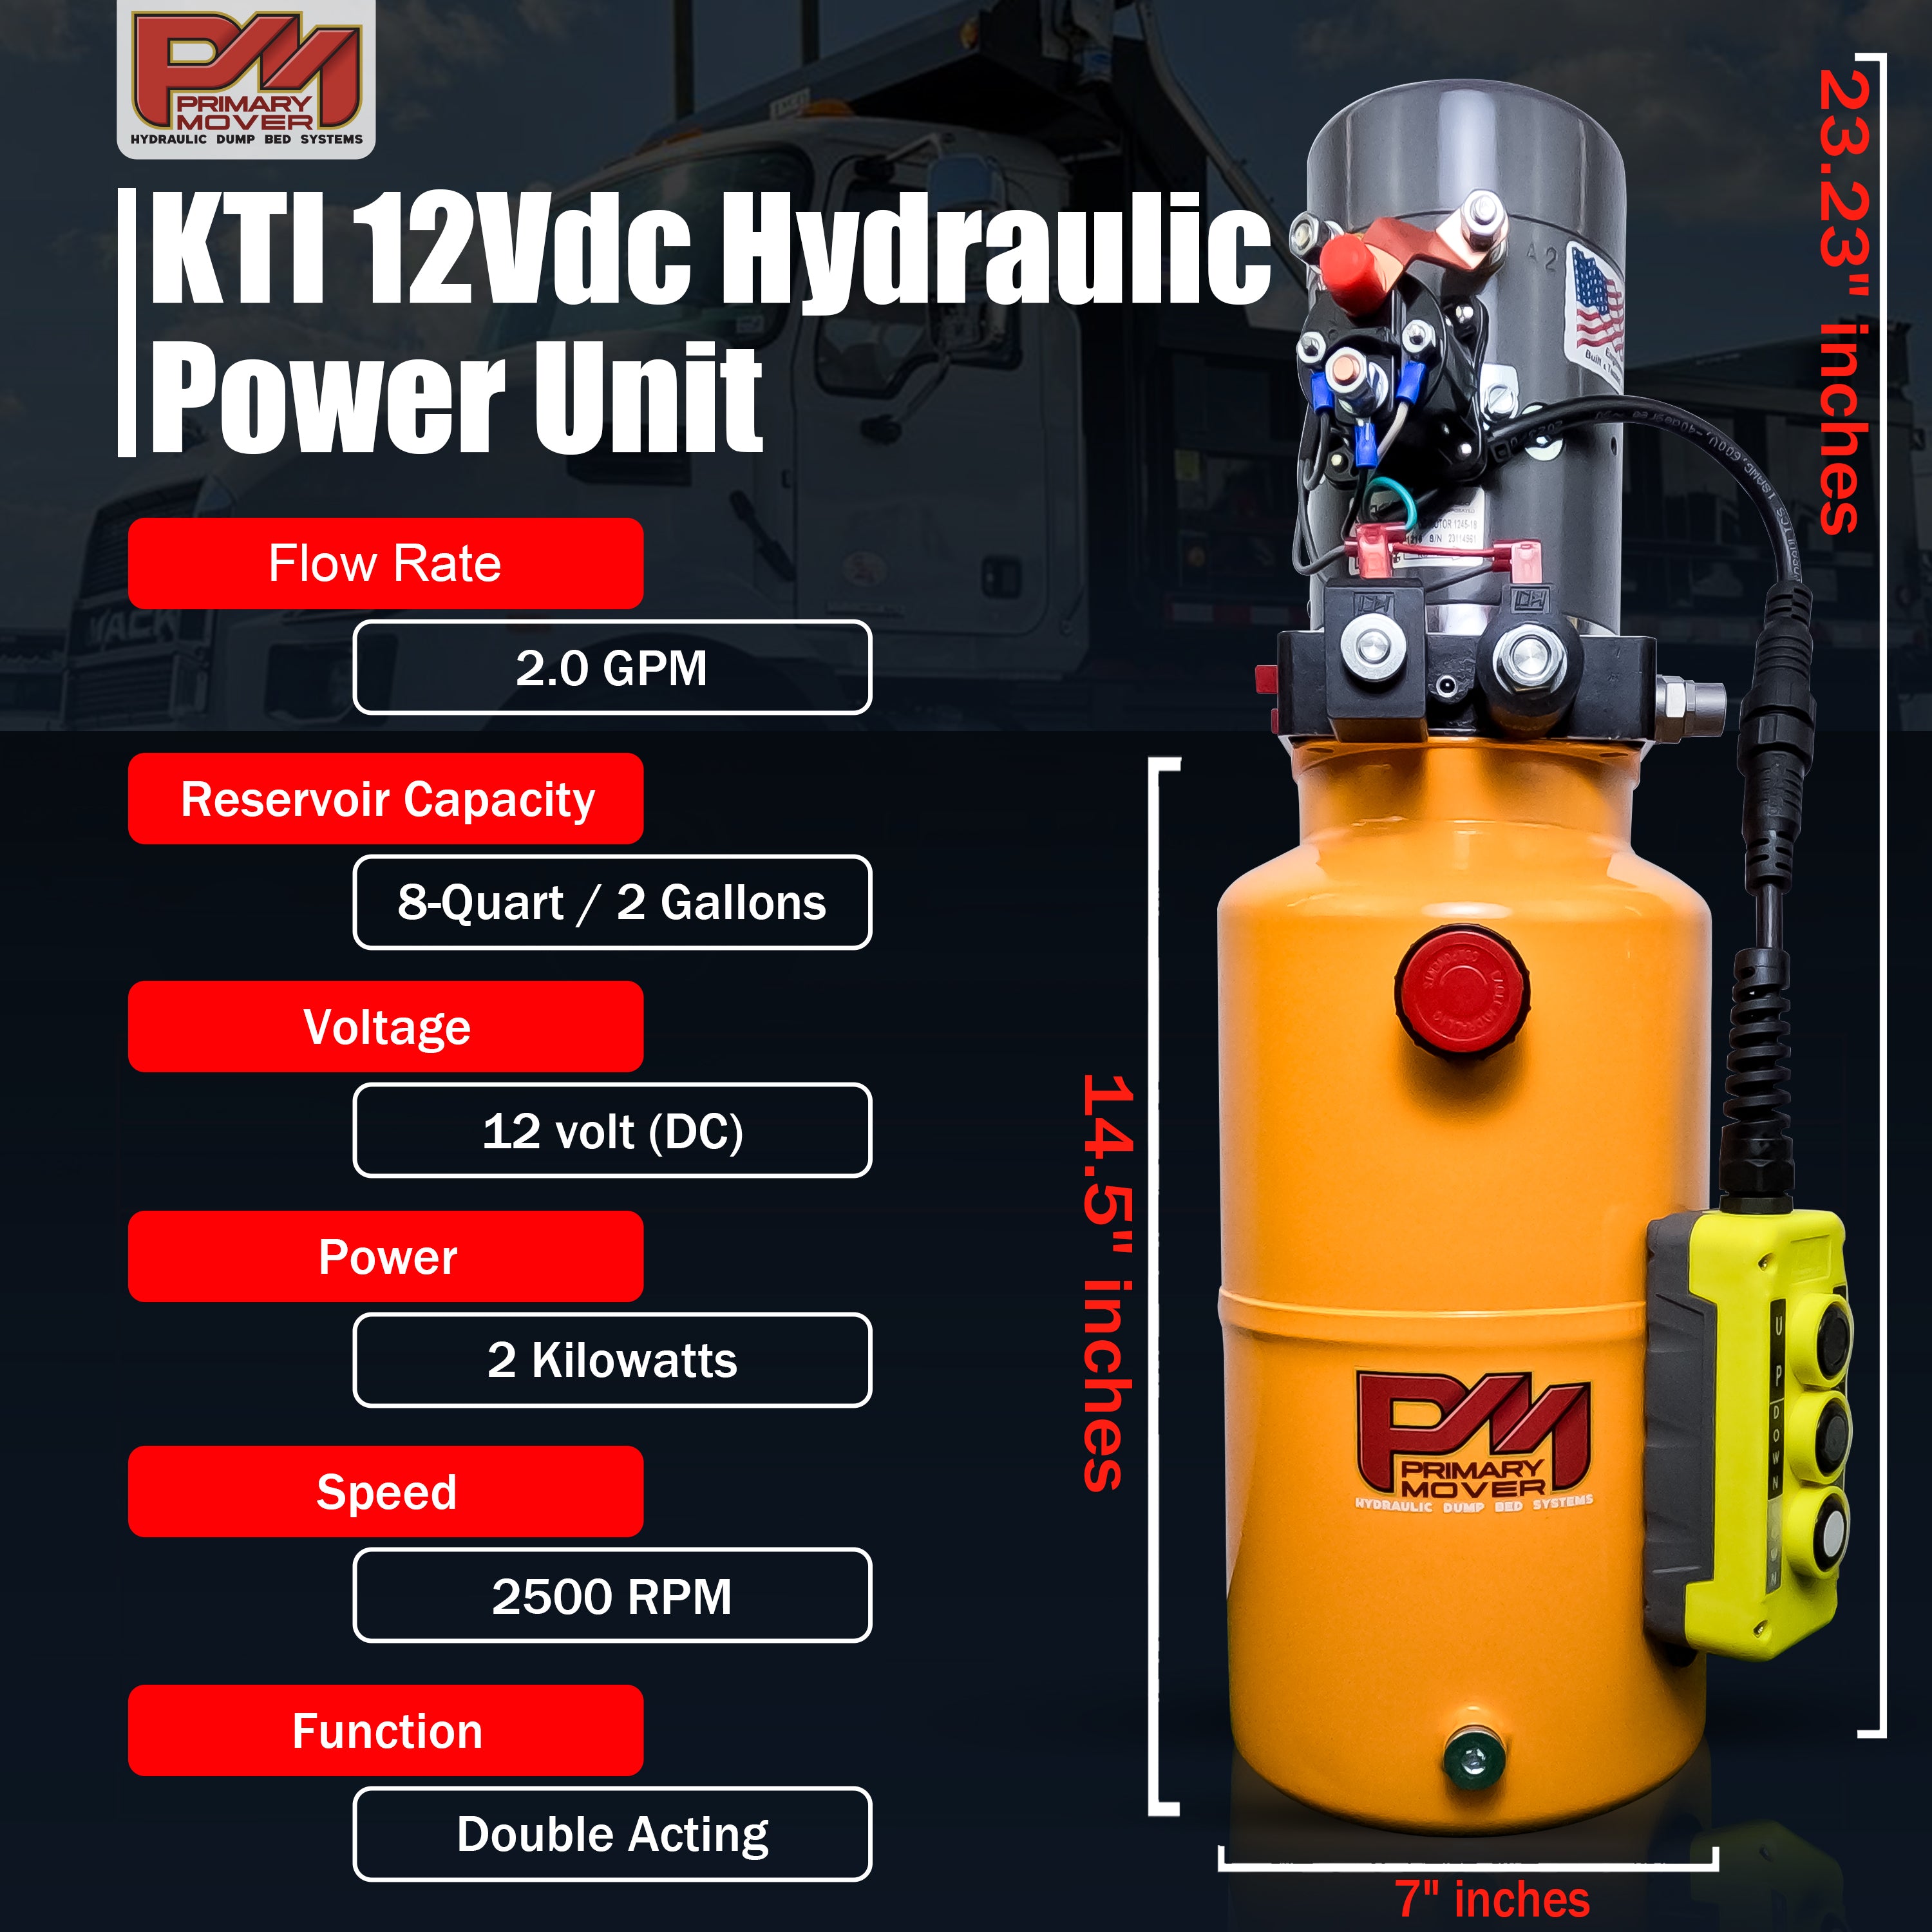 KTI 12V Double-Acting Hydraulic Pump with steel reservoir, featuring red buttons and black rim, ideal for efficient hydraulic dump bed systems.